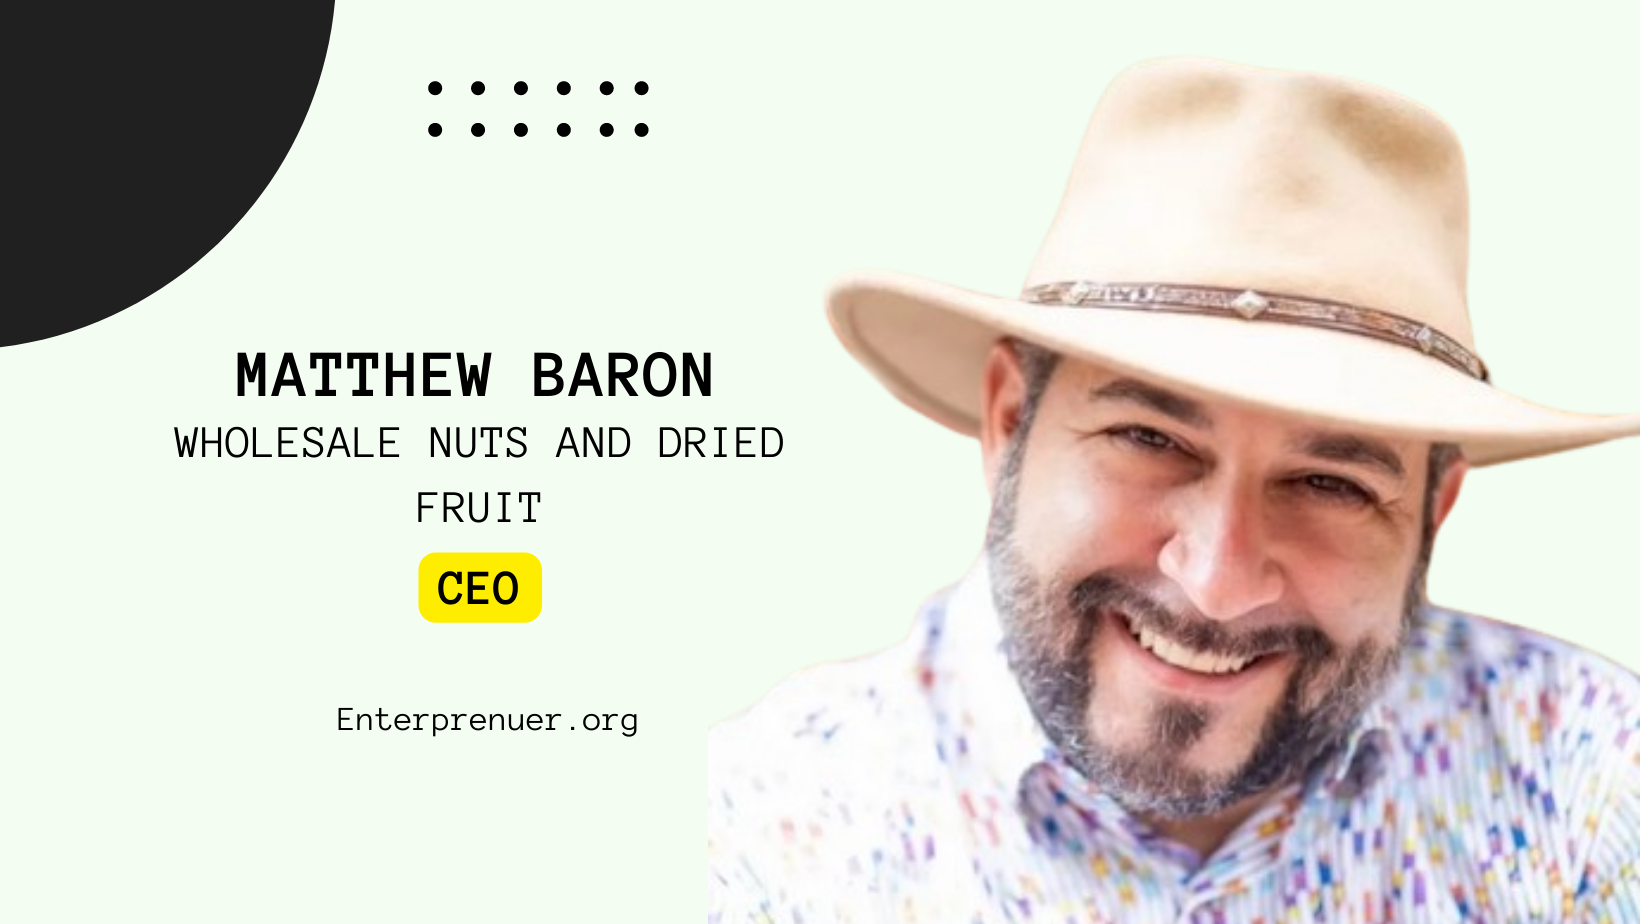 Meet Matthew Baron CEO of Wholesale Nuts And Dried Fruit